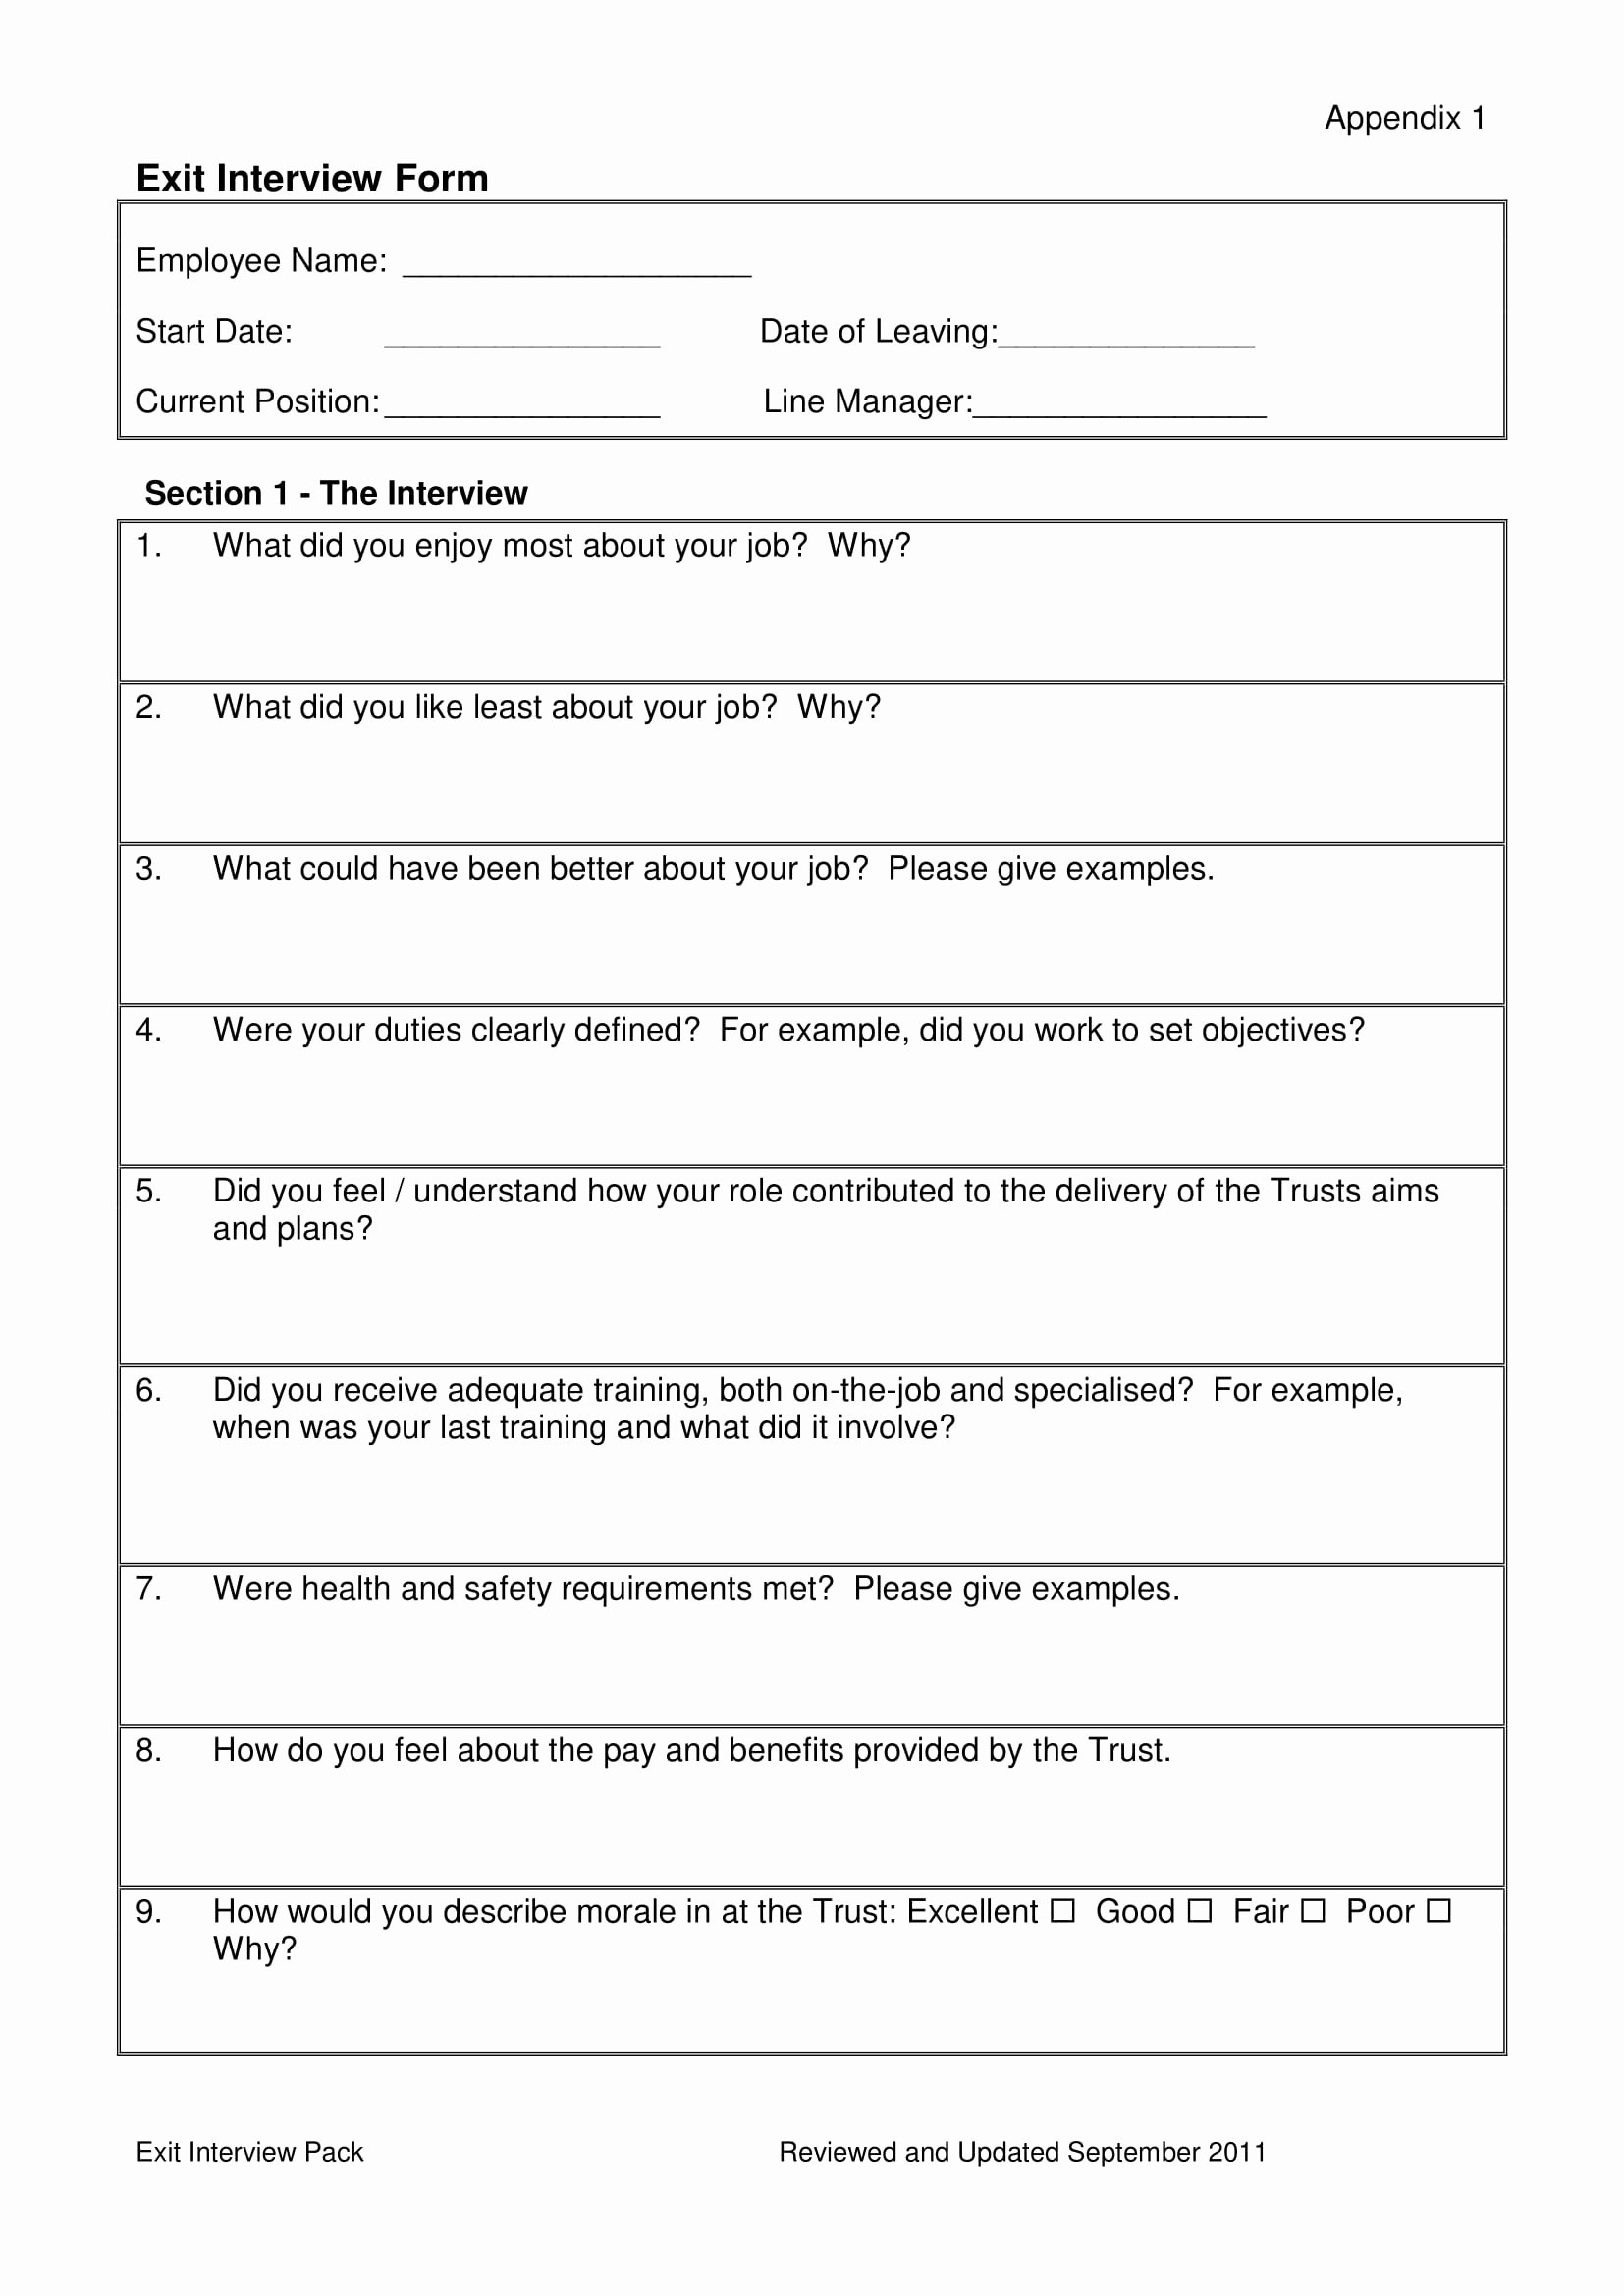 Exit Interview Questions and Answers Pdf Awesome 9 Exit Interview form Examples Pdf